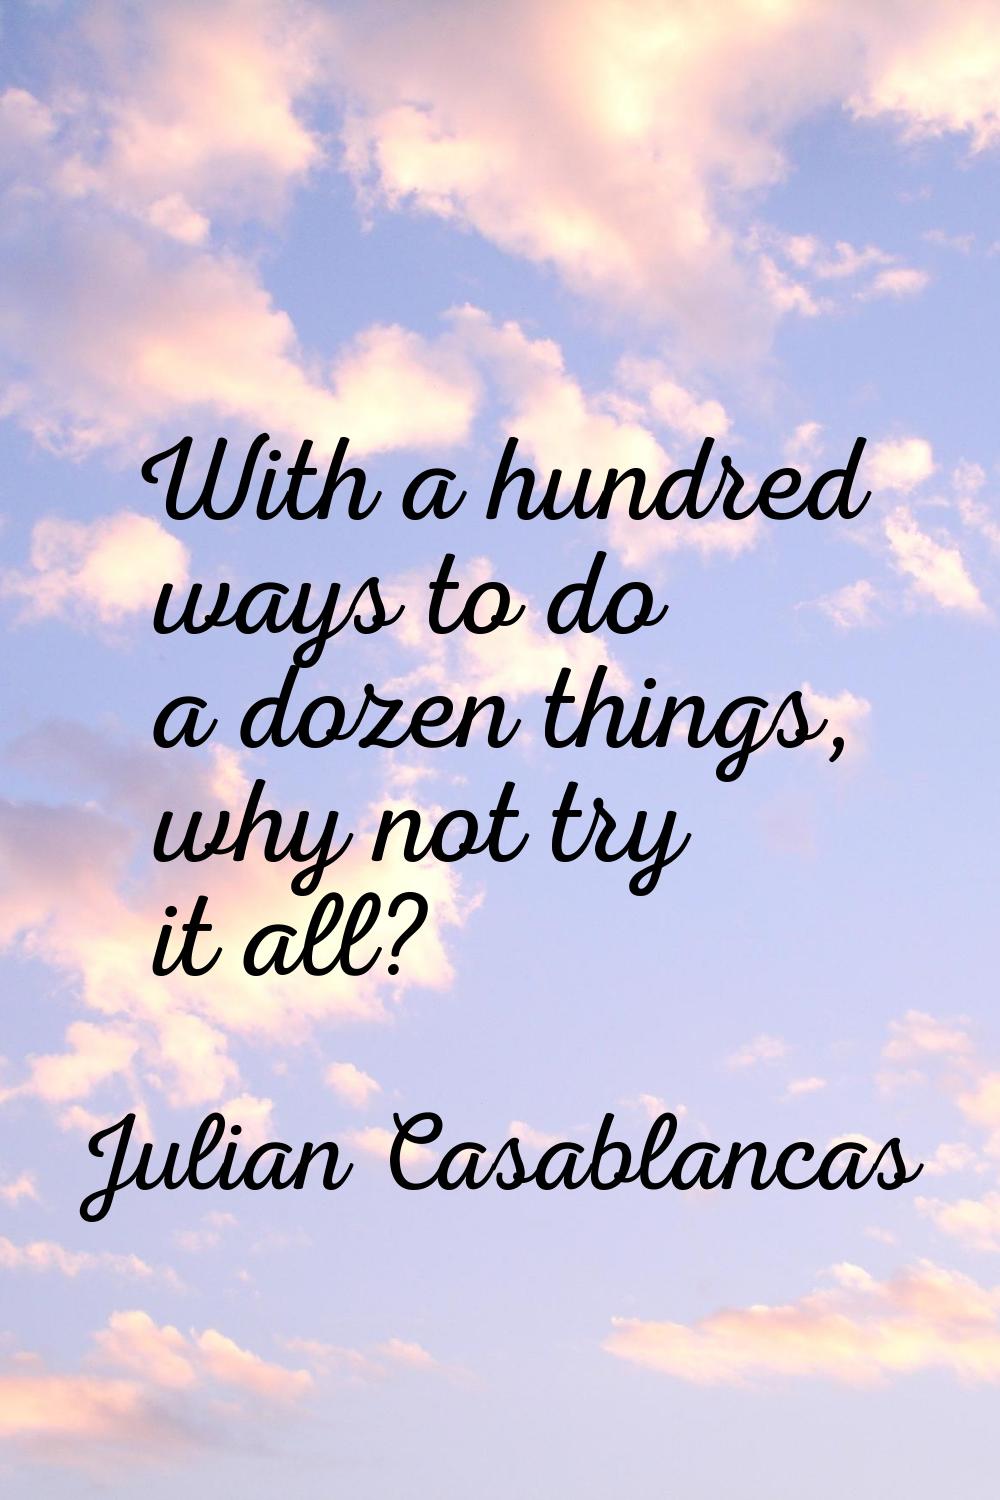 With a hundred ways to do a dozen things, why not try it all?